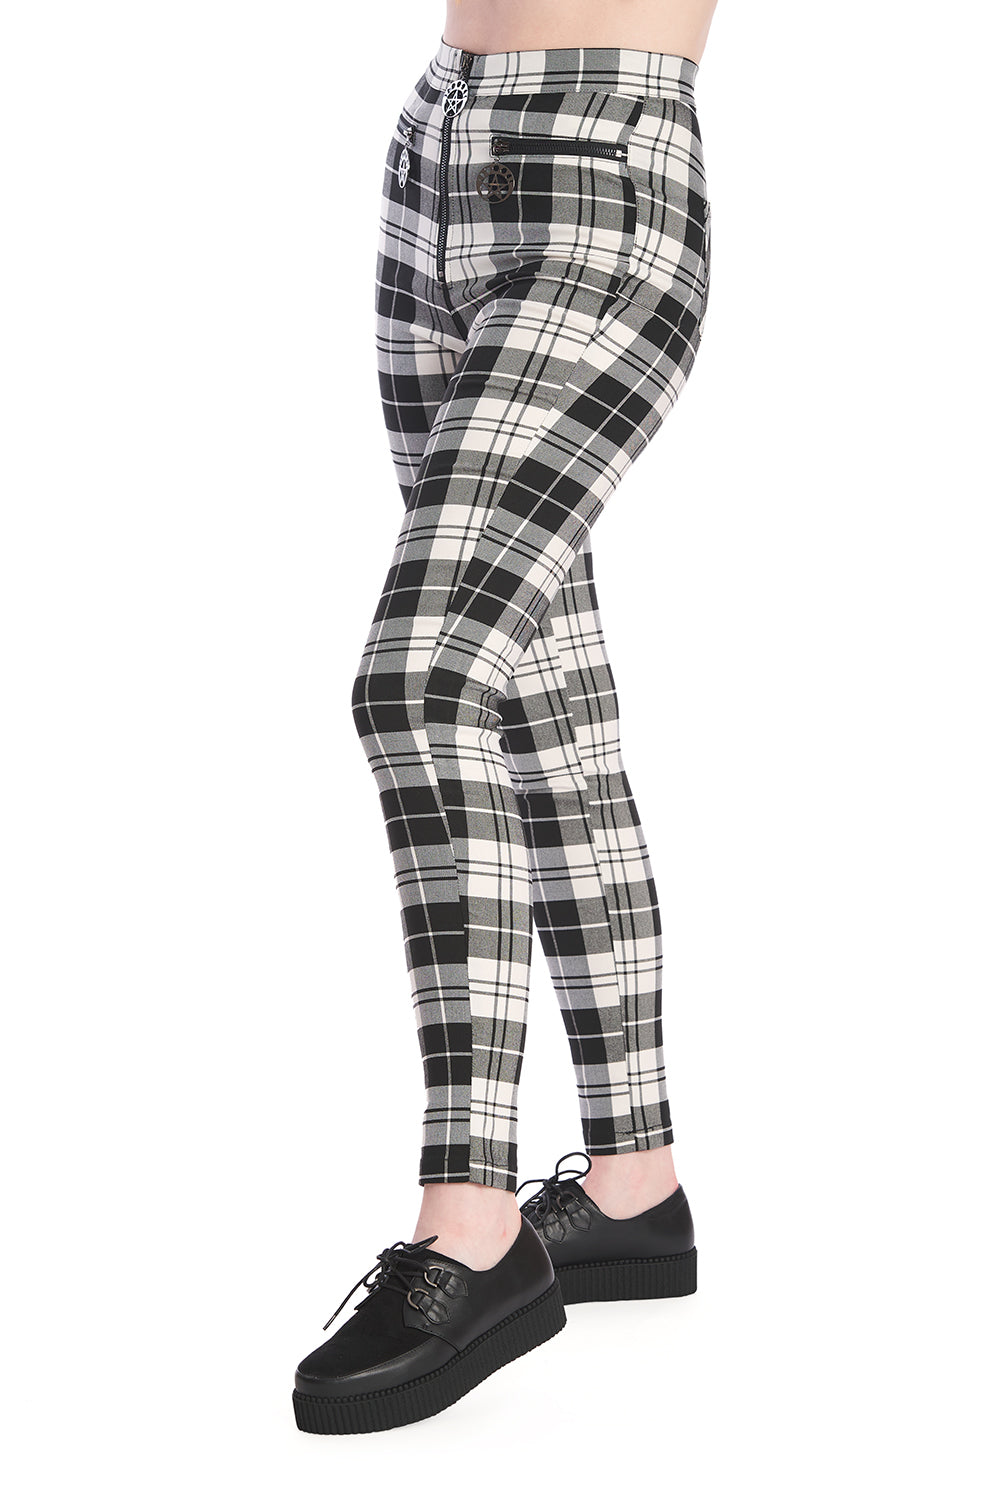  High waisted check skinny legged trousers in black and white 